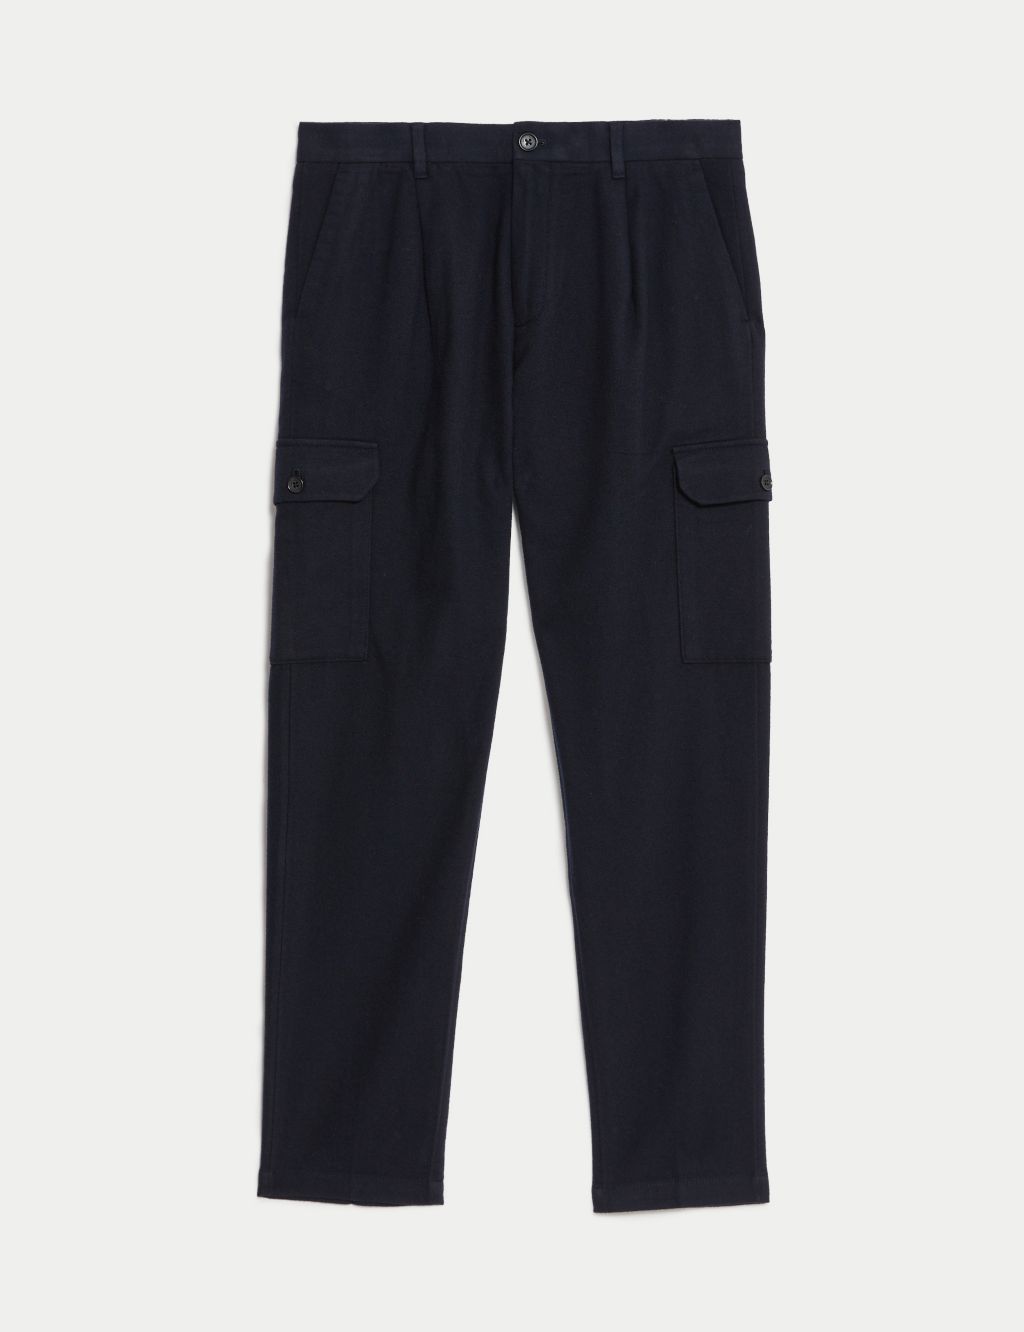 Tapered Fit Wool Blend Cargo Trousers image 2